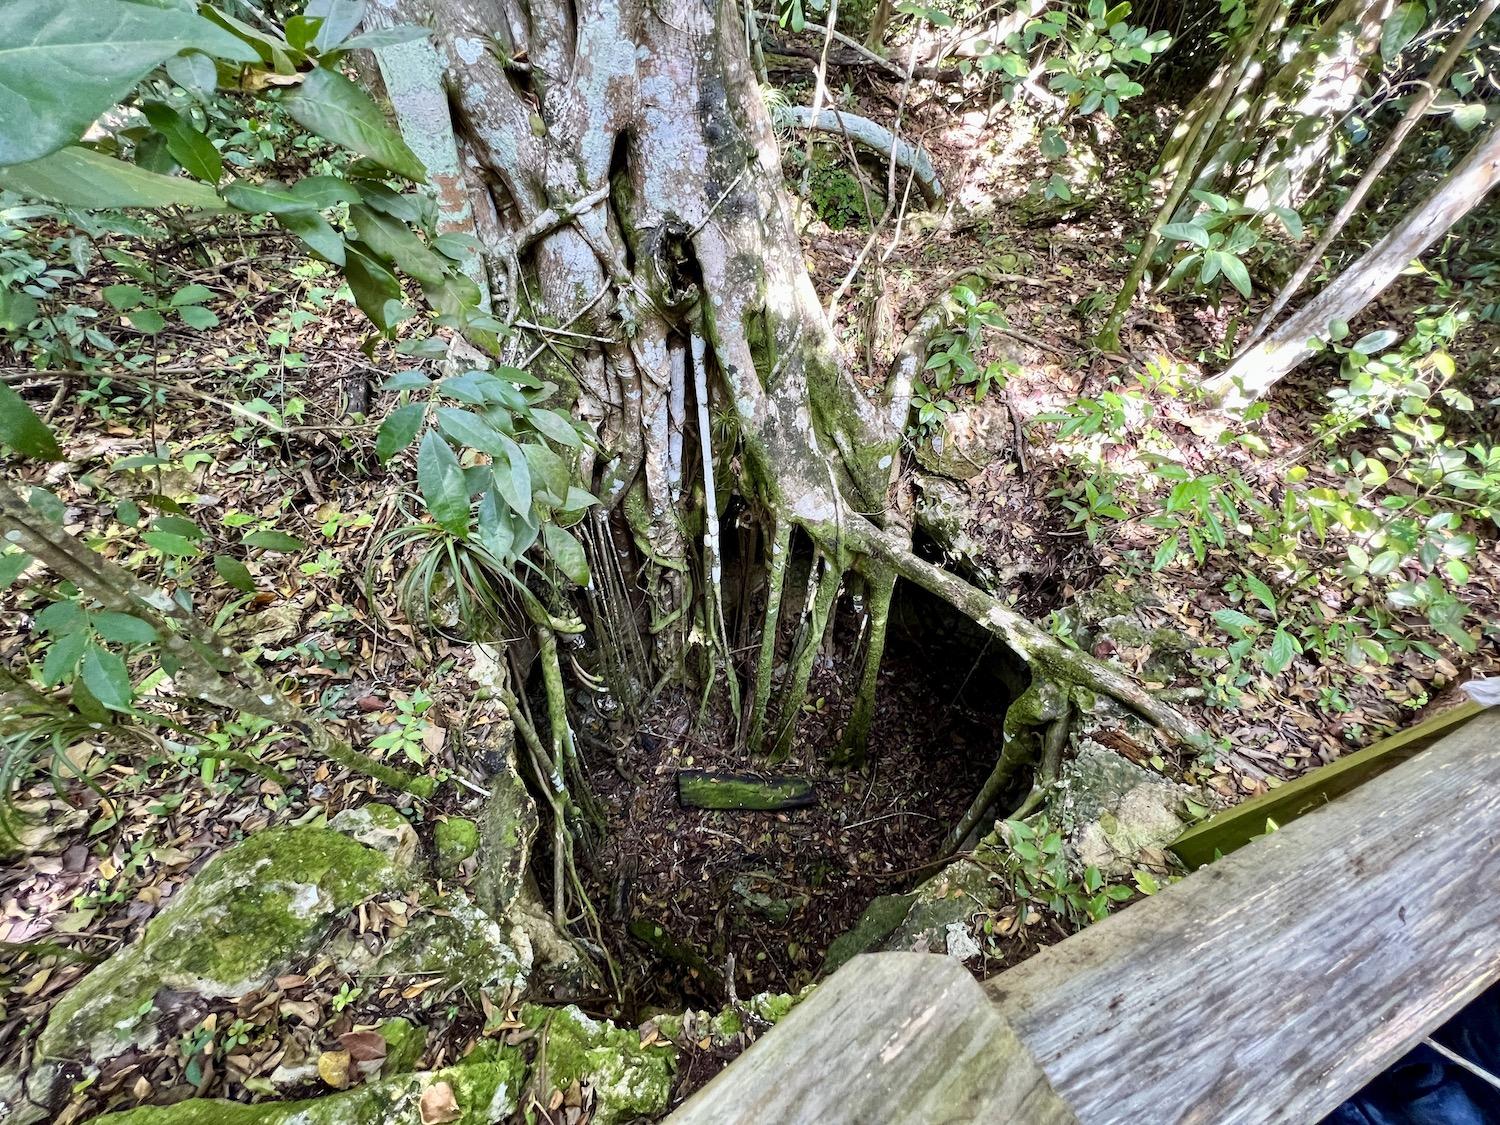 There are an estimated 19 sinkholes per acre in Primeval Forest National Park.